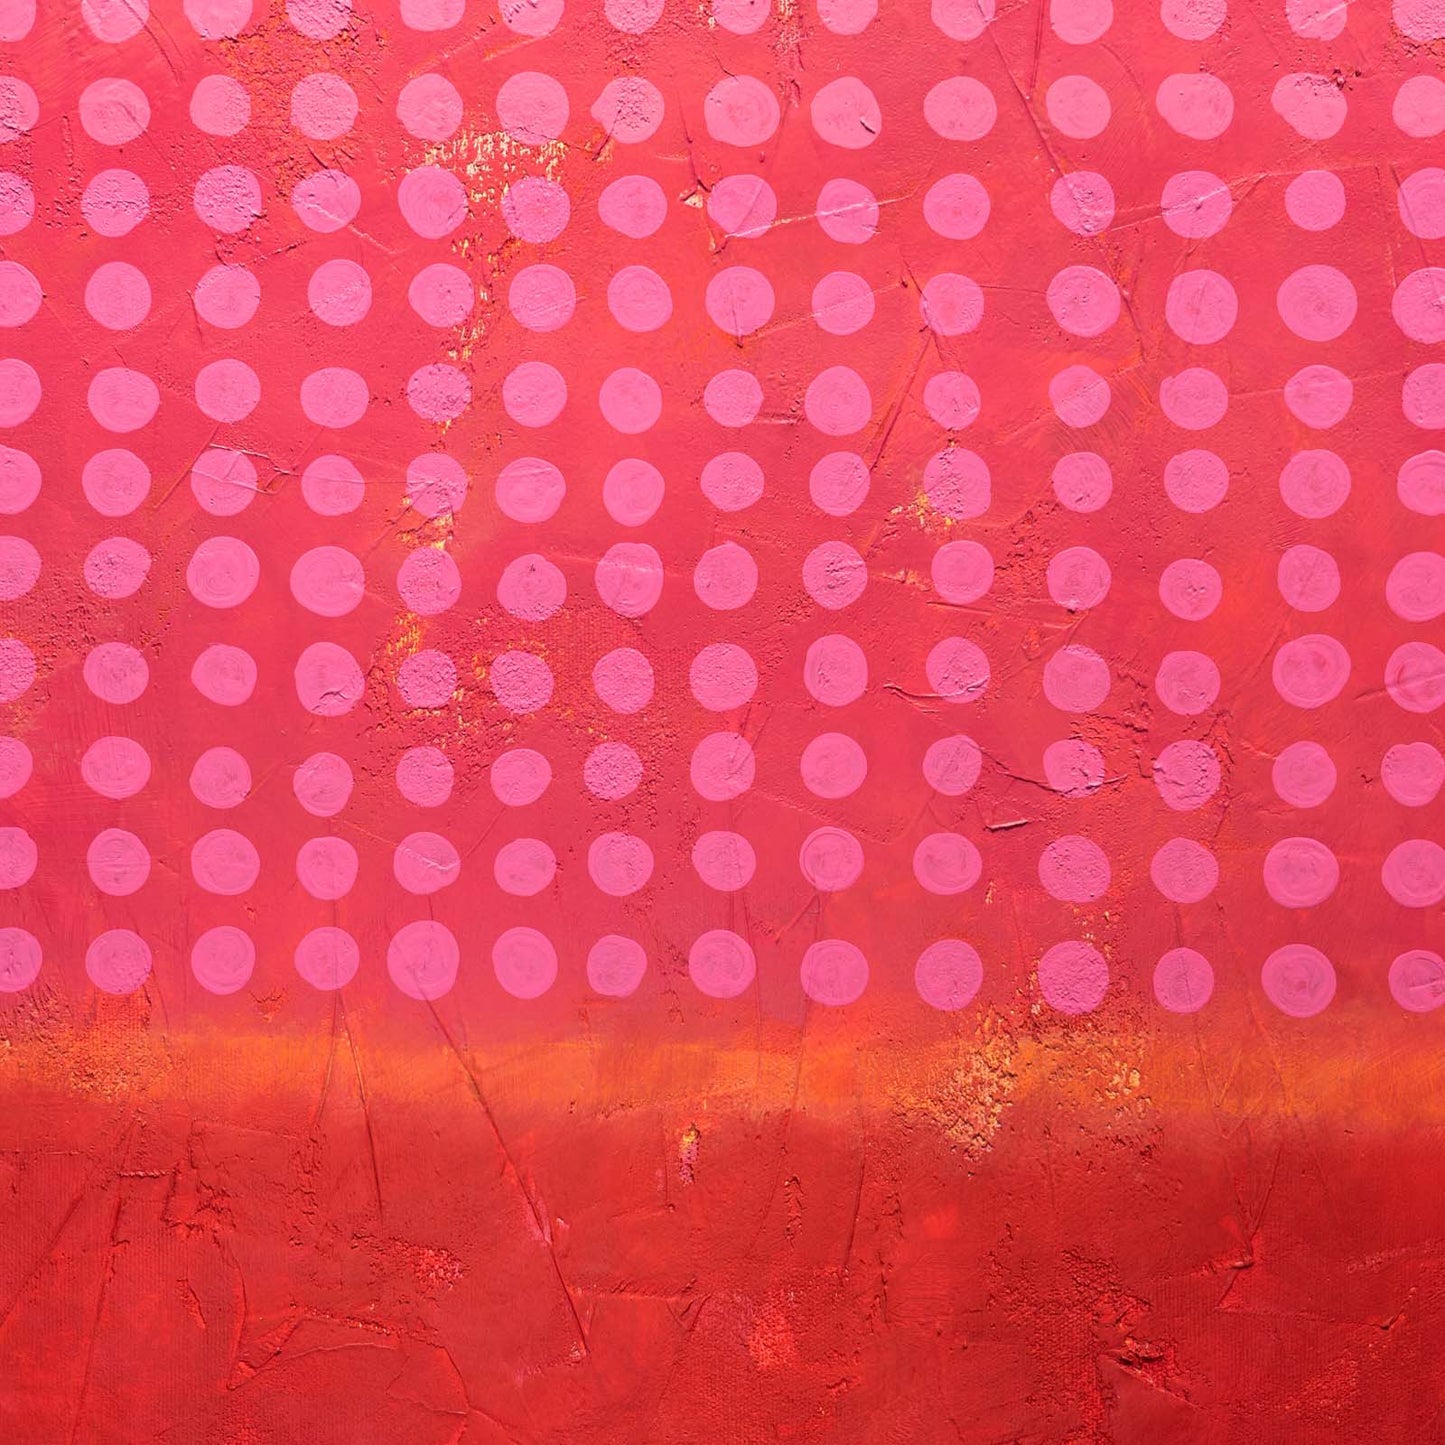 Dots on a Rothko No. 02 - Acrylic & Colored Pencil on Canvas